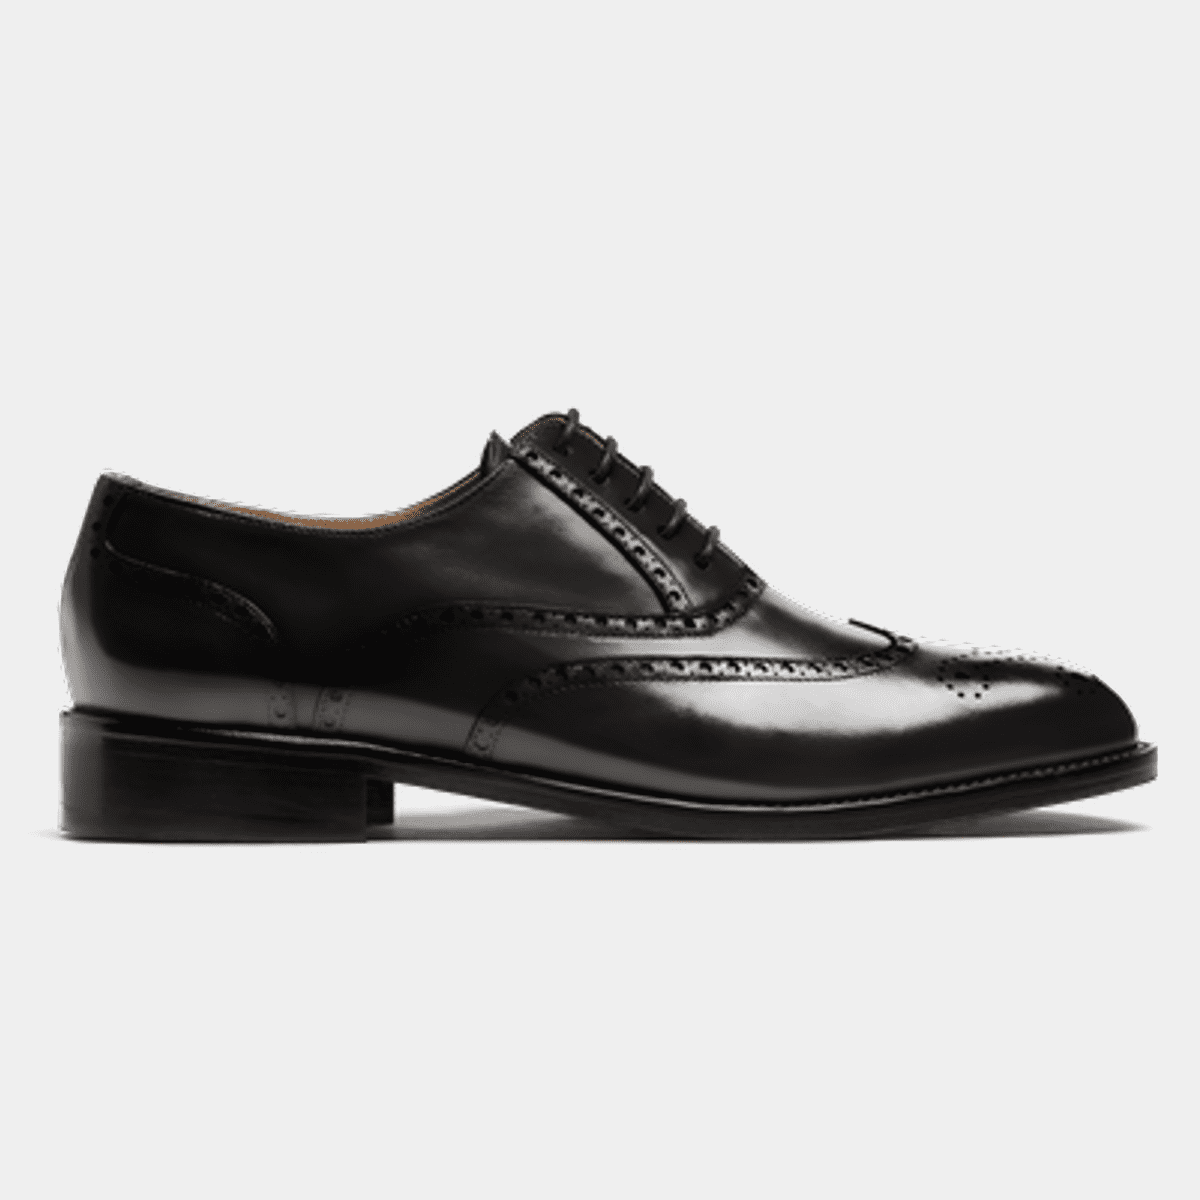 Full brogue Oxford Shoes | Hockerty